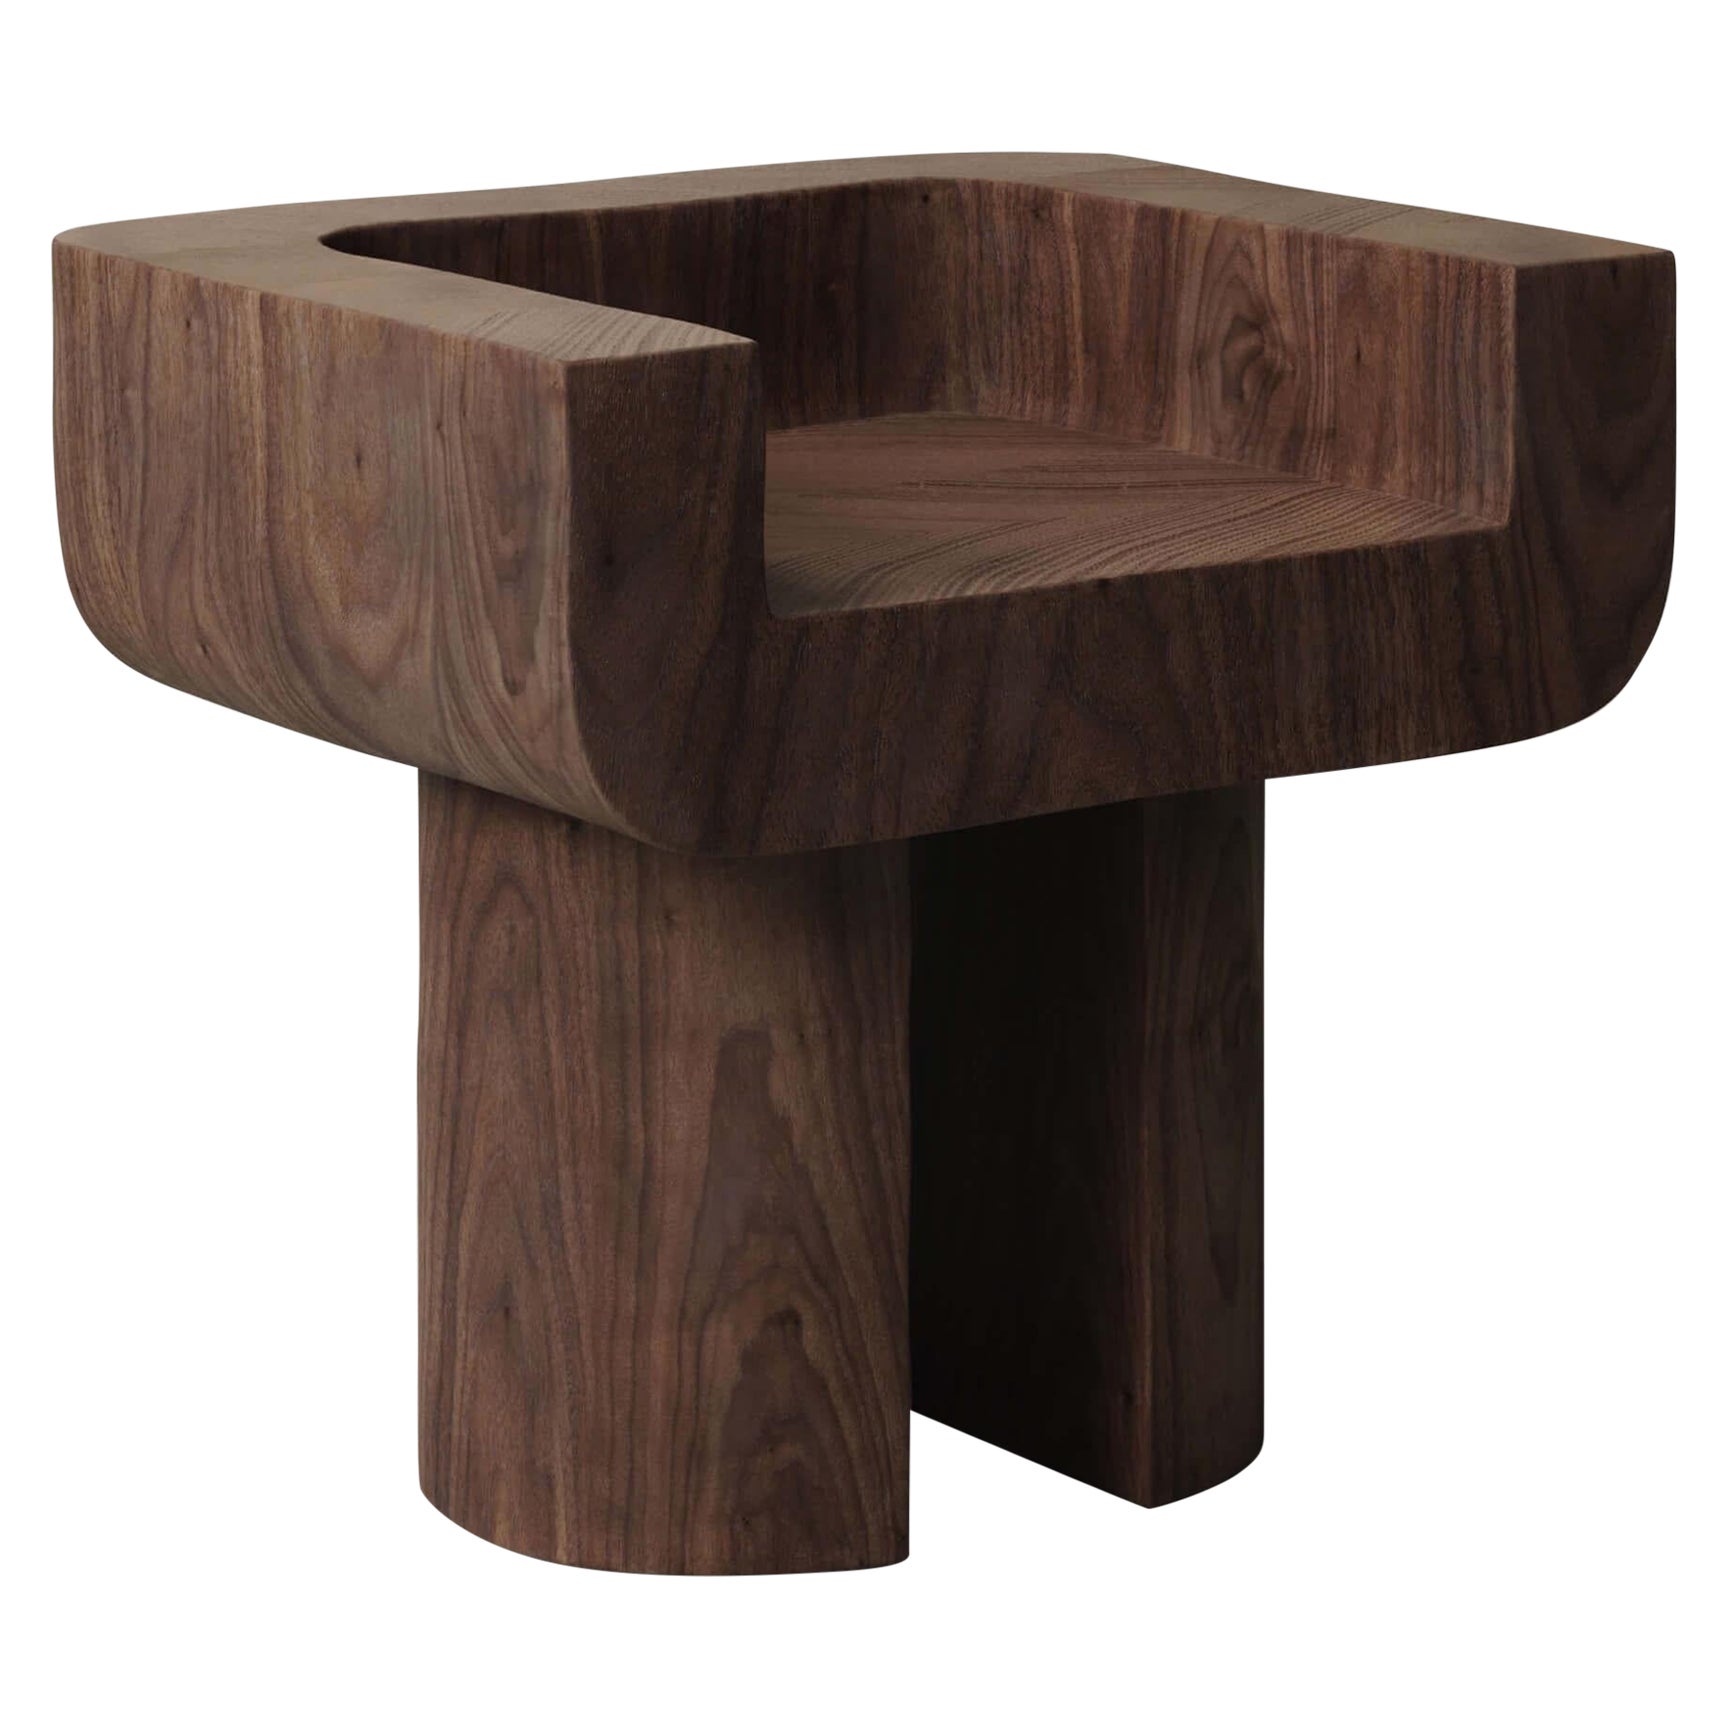 M_001 Walnut Chair by Monolith Studio For Sale